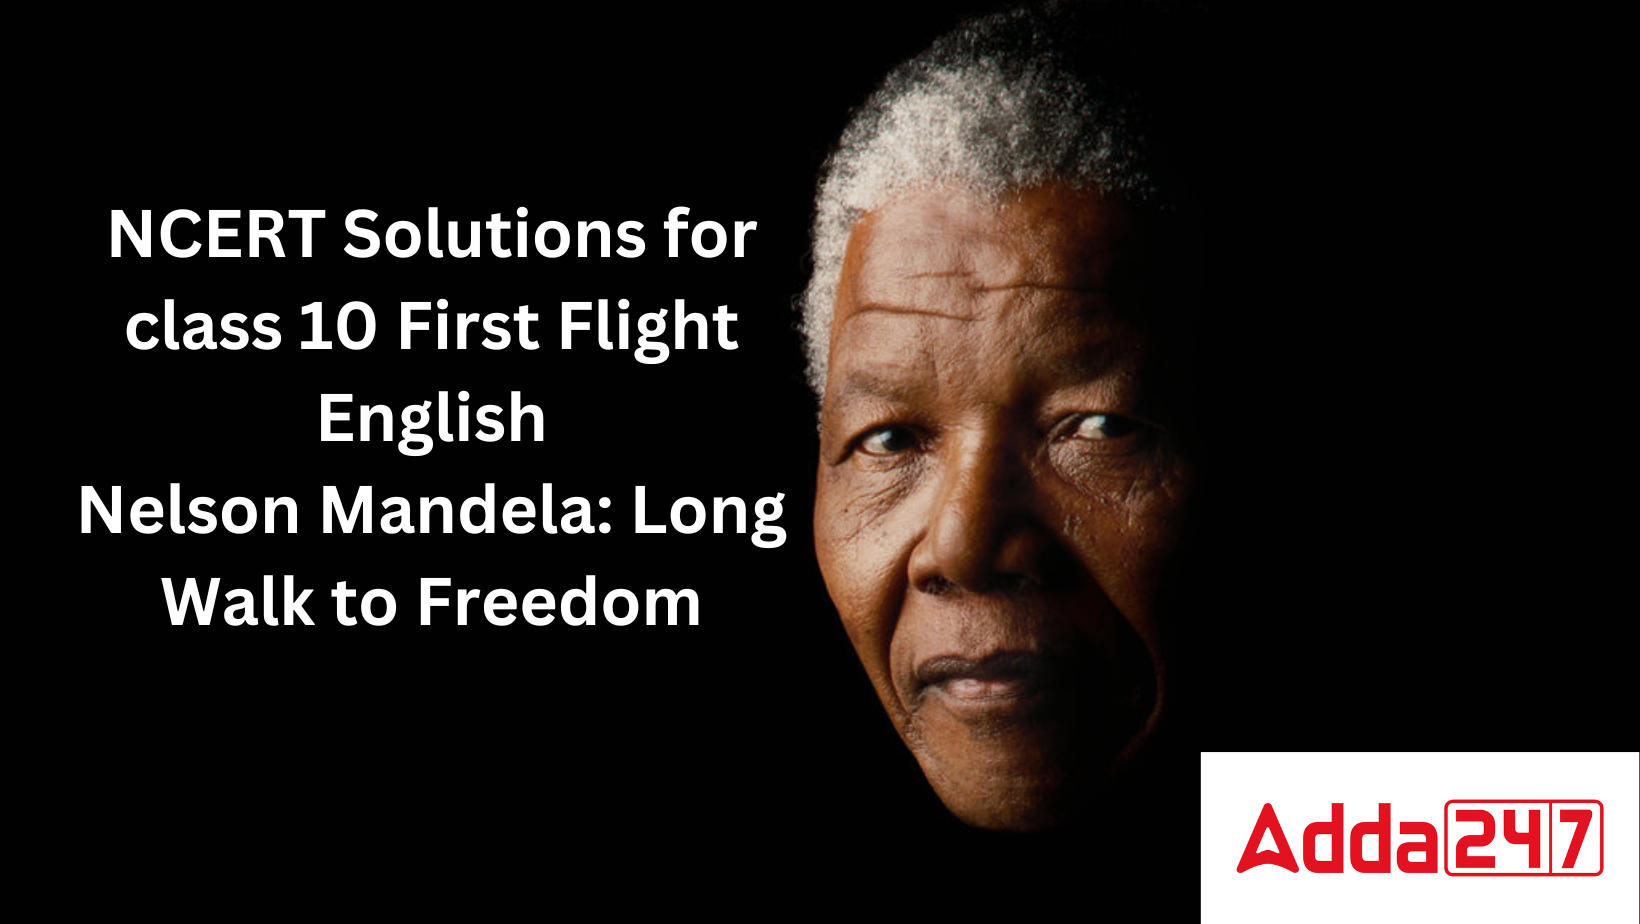 NCERT Solutions for class 10 First Flight English Nelson Mandela Long Walk to Freedom